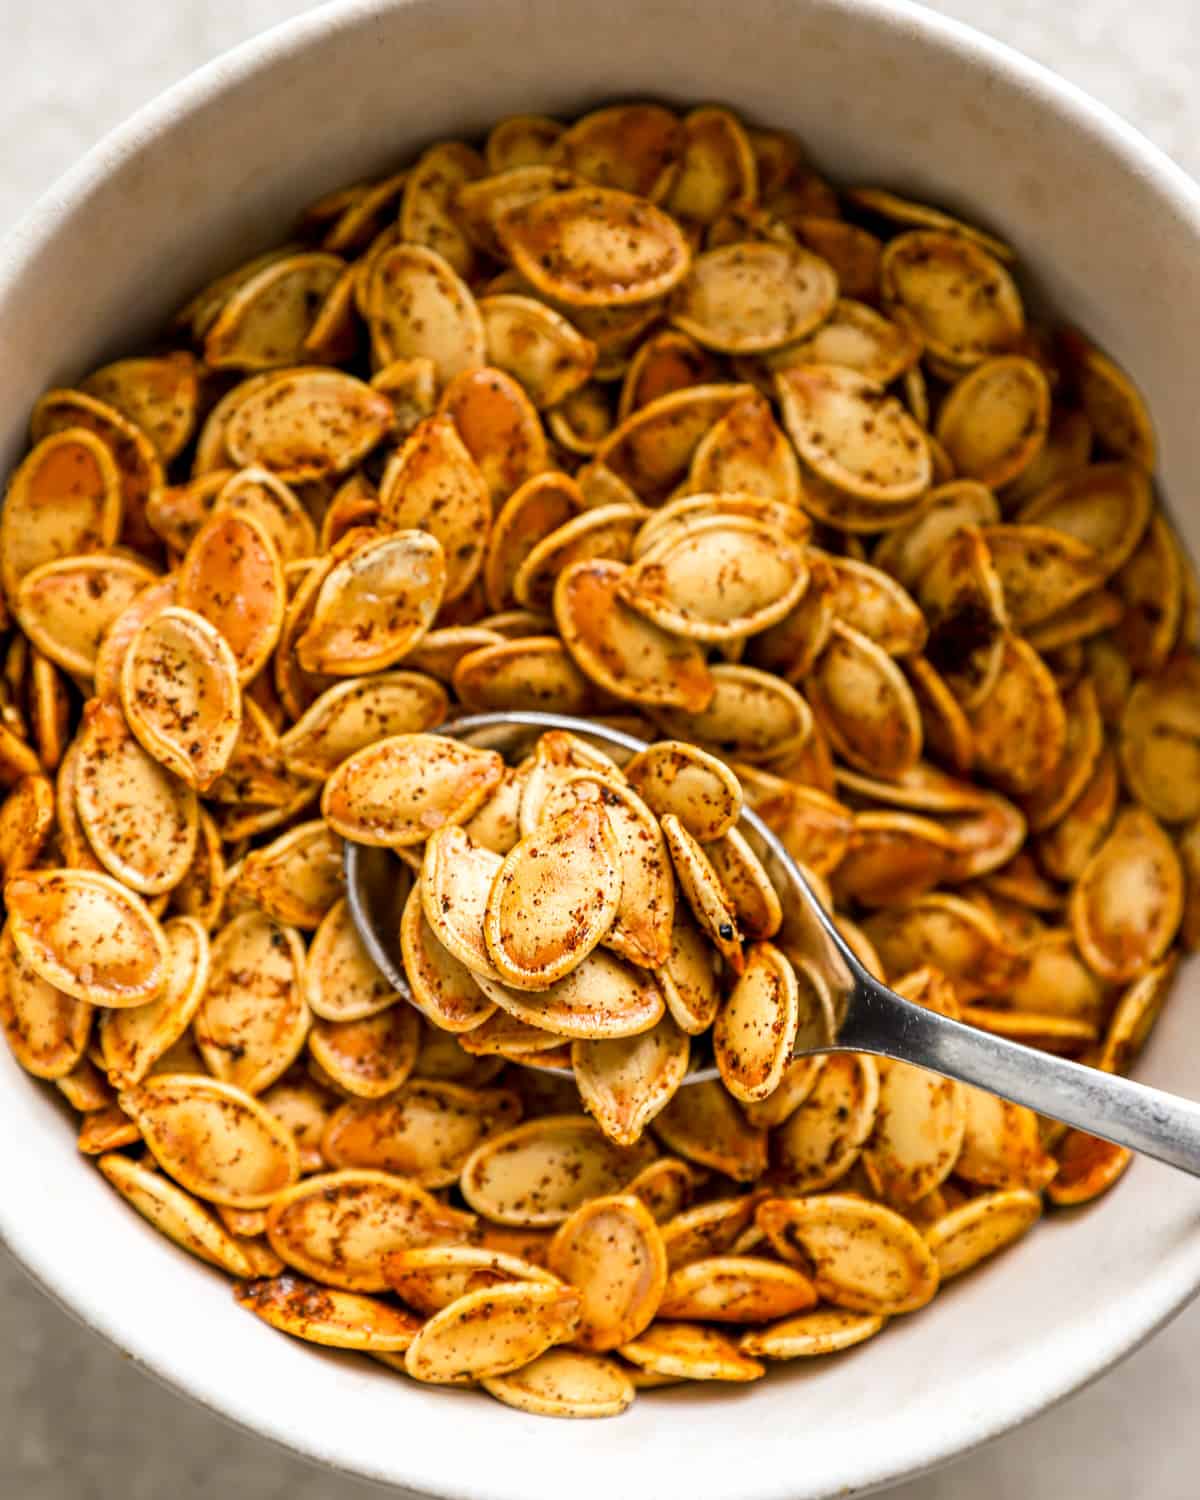 Roasted pumpkin seeds in a white bowl with a spoon.